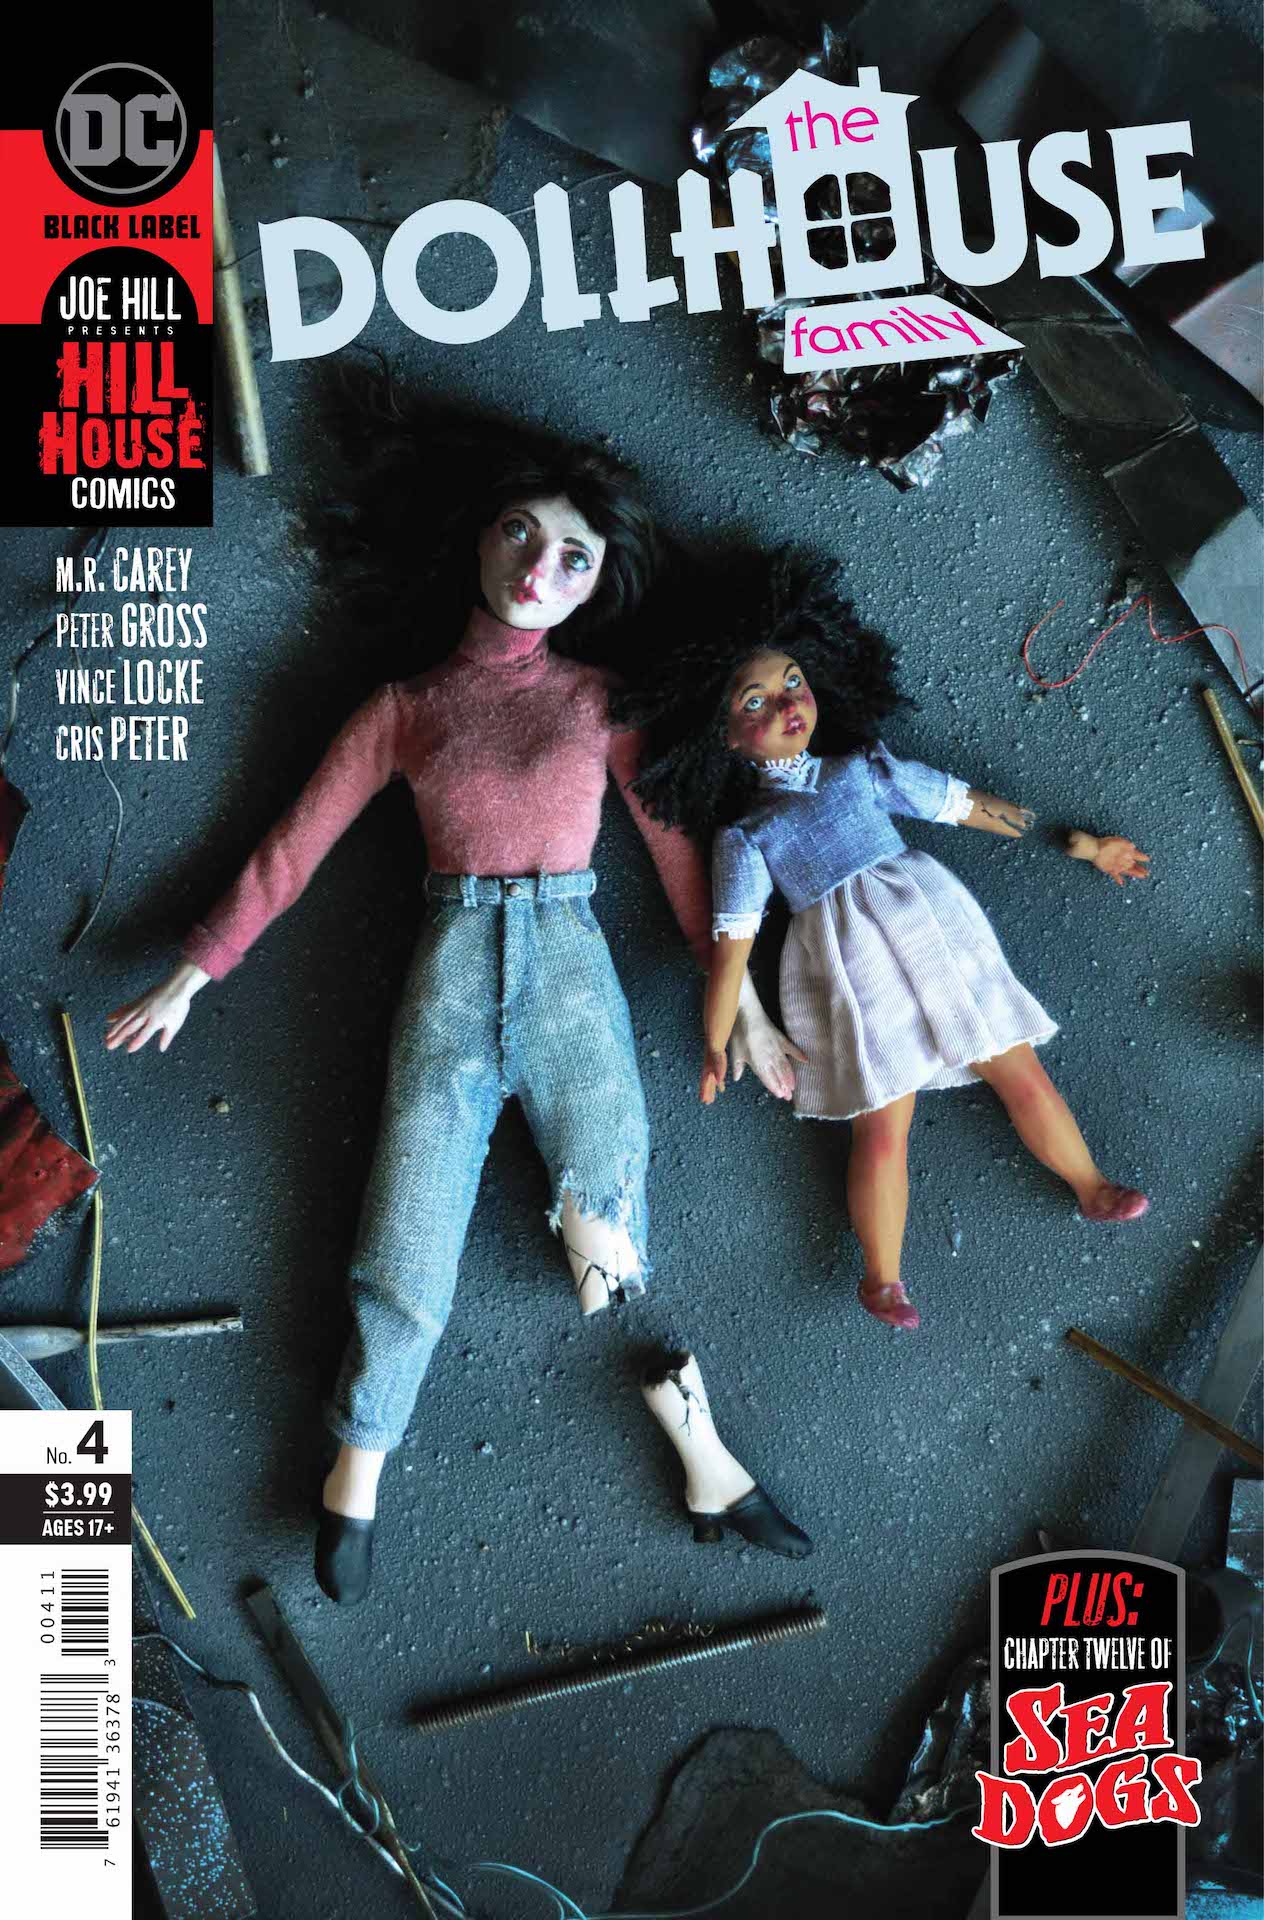 DC Preview: The Dollhouse Family #4